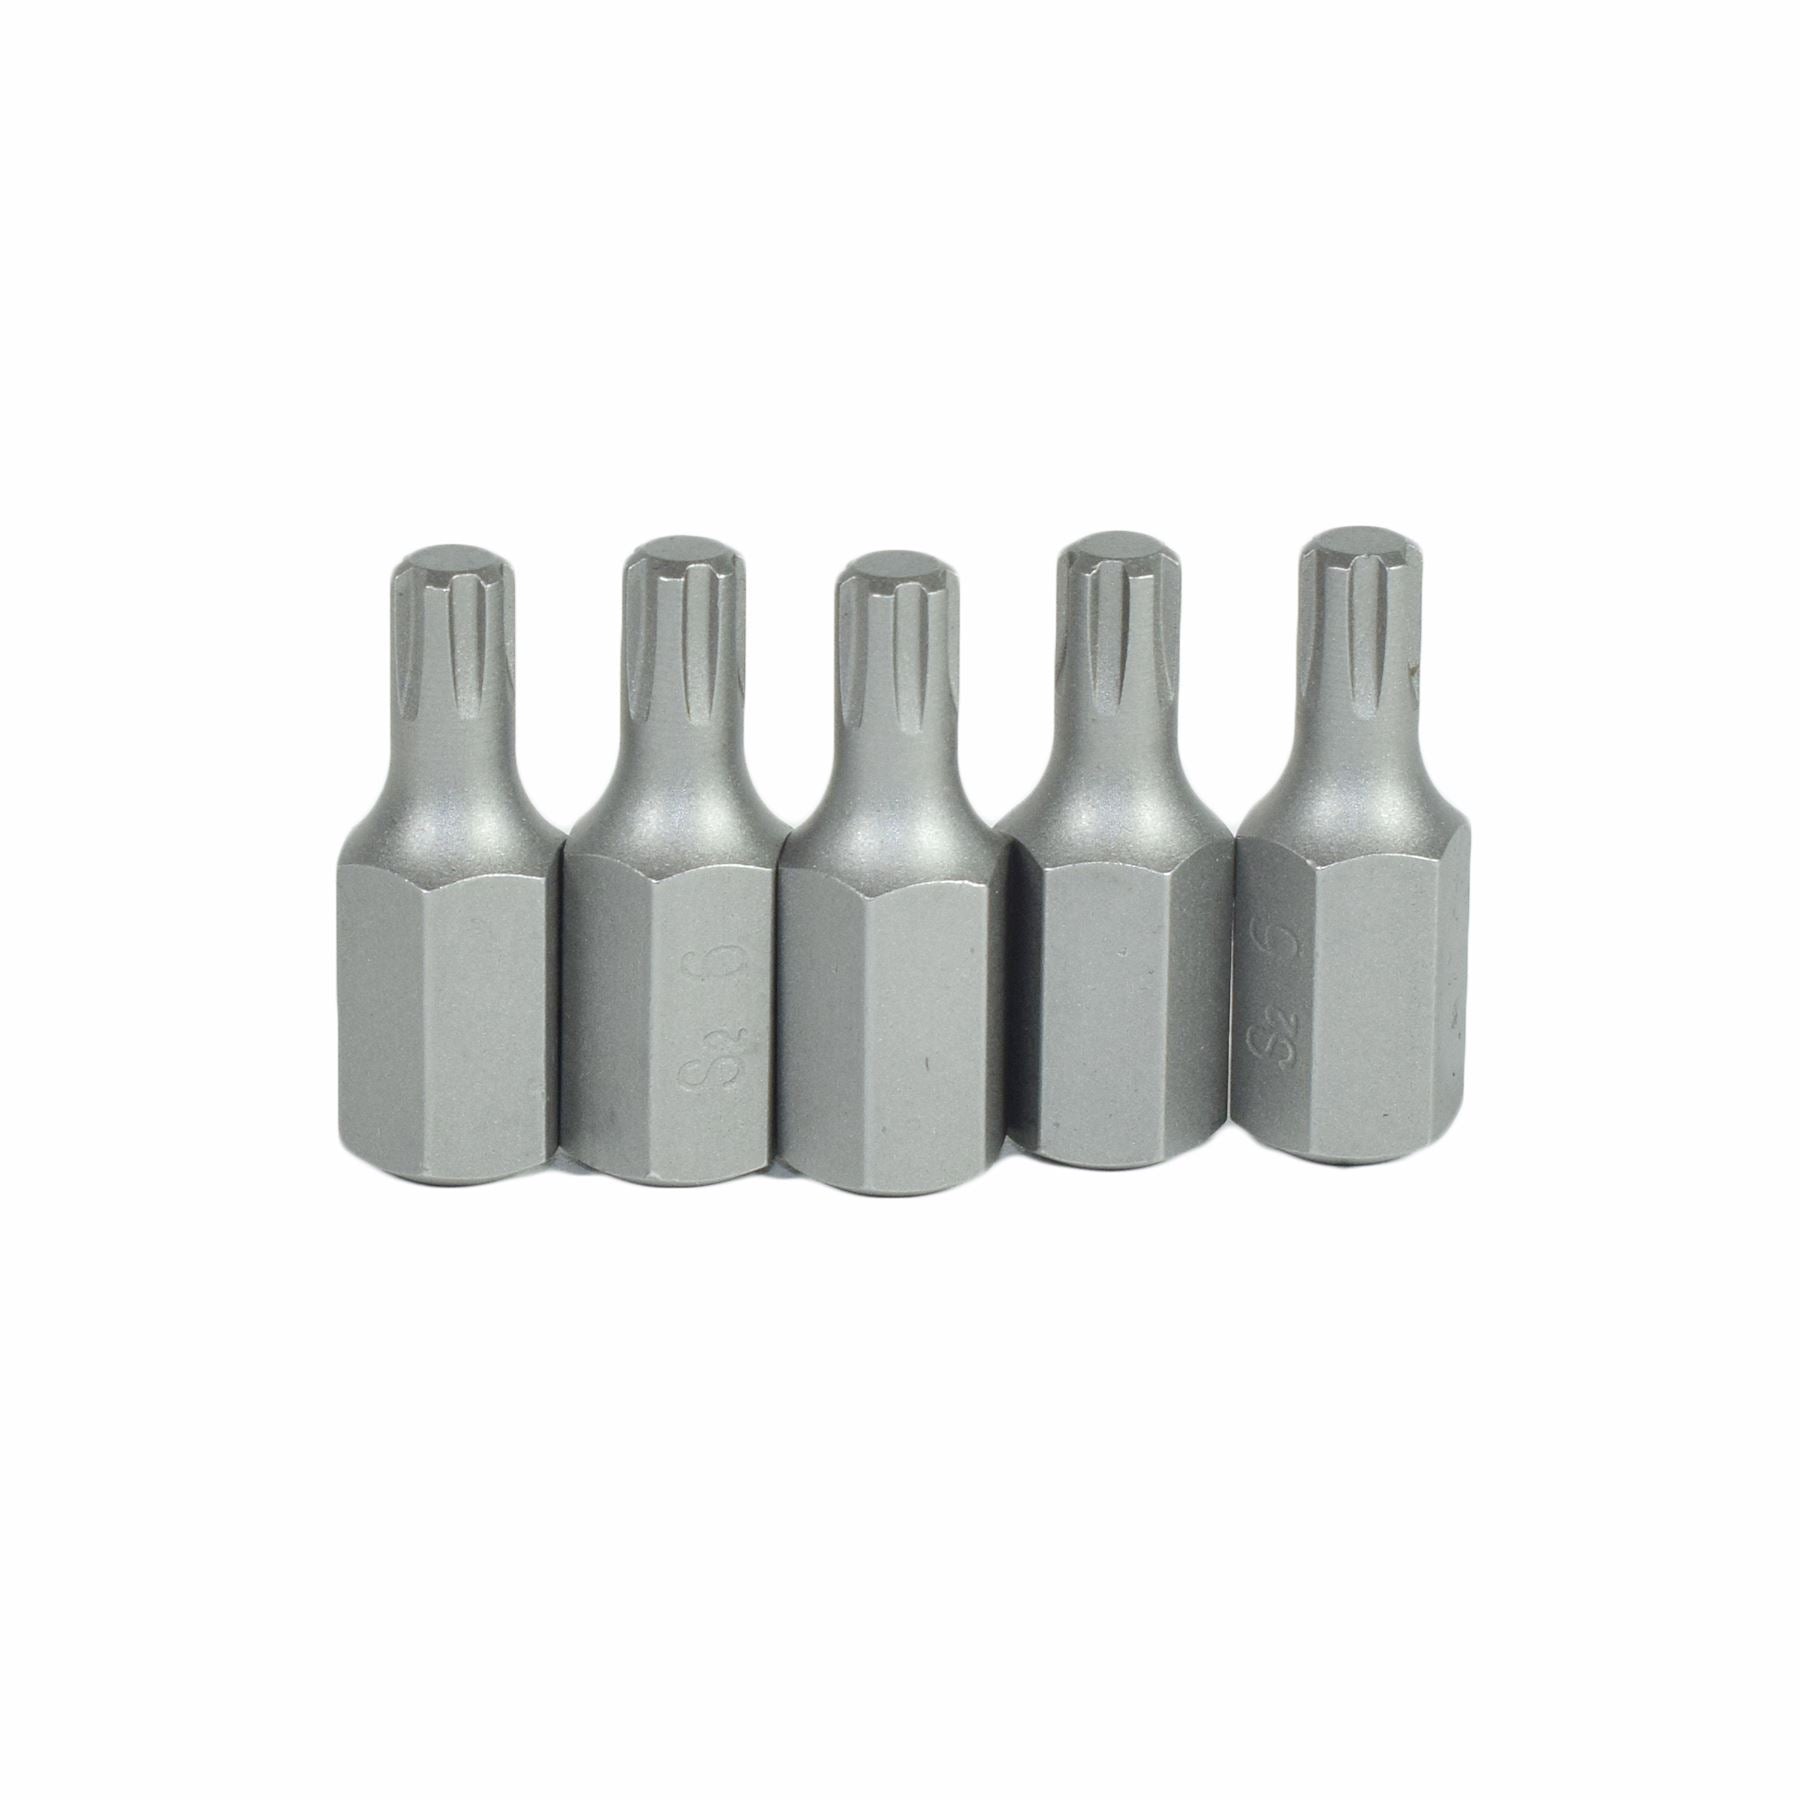 5 Pack M5 - M13 Male 30mm Ribe Bits With 10mm Hex End S2 Steel